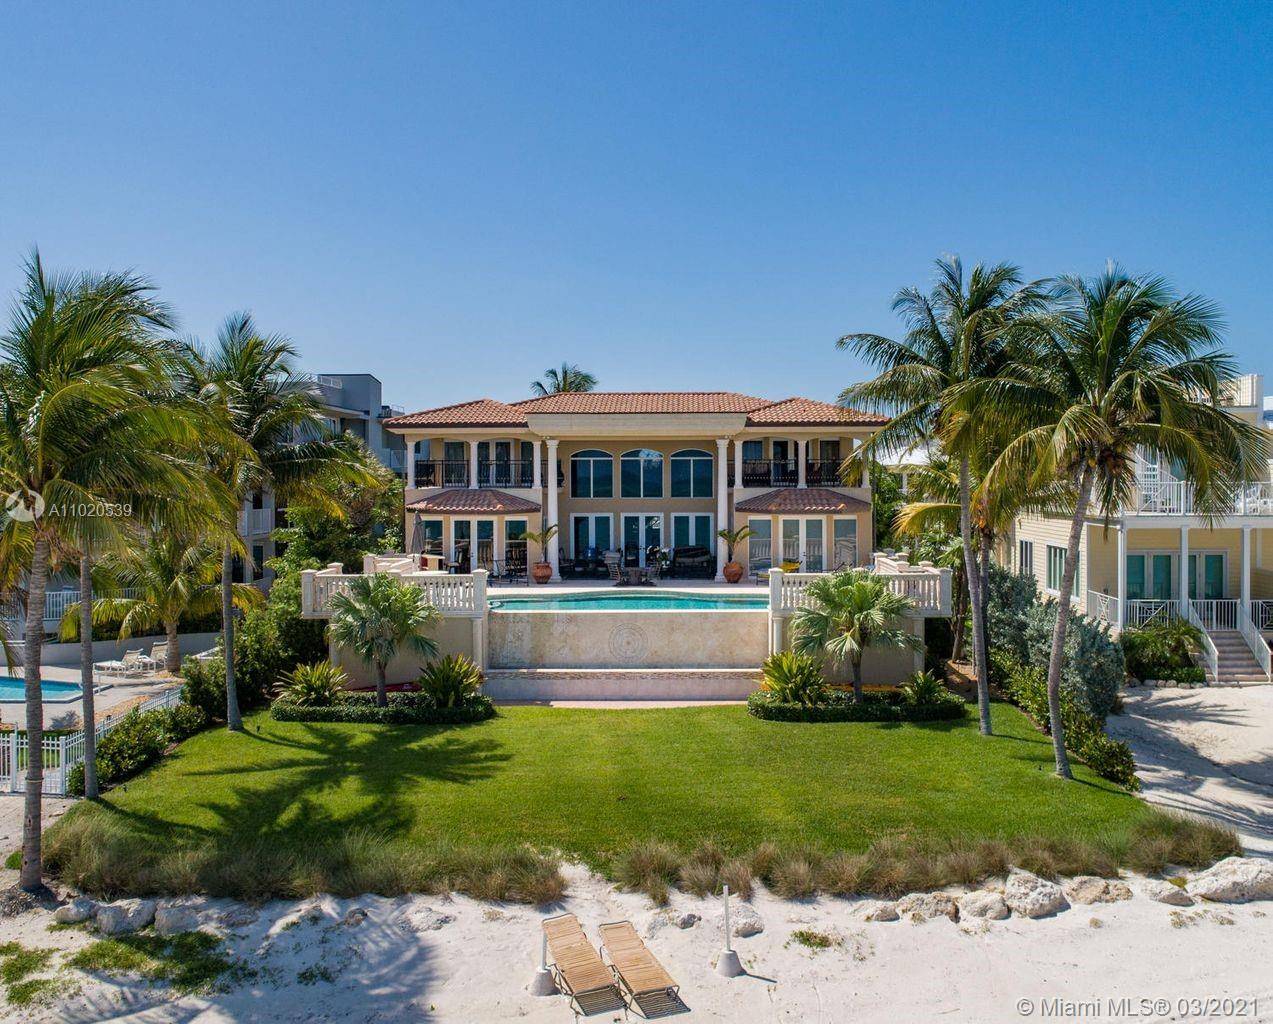 Here is the ultimate beachfront estate for the island life you have always dreamed of.